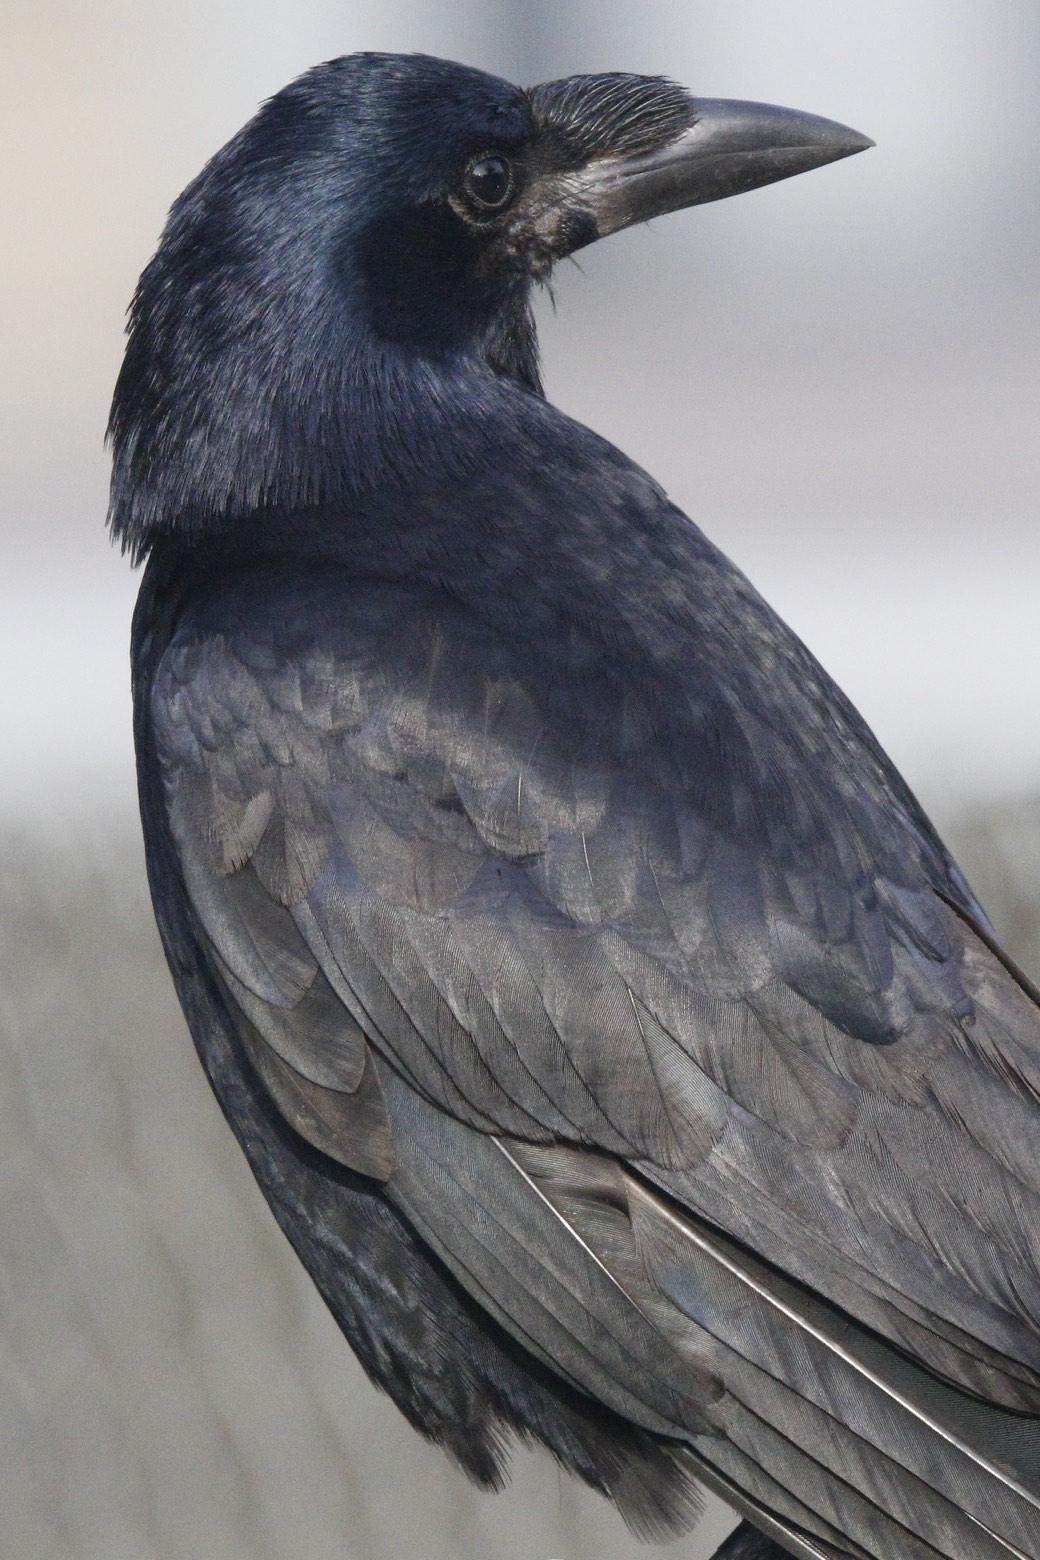 Rook Photo by Emily Willoughby